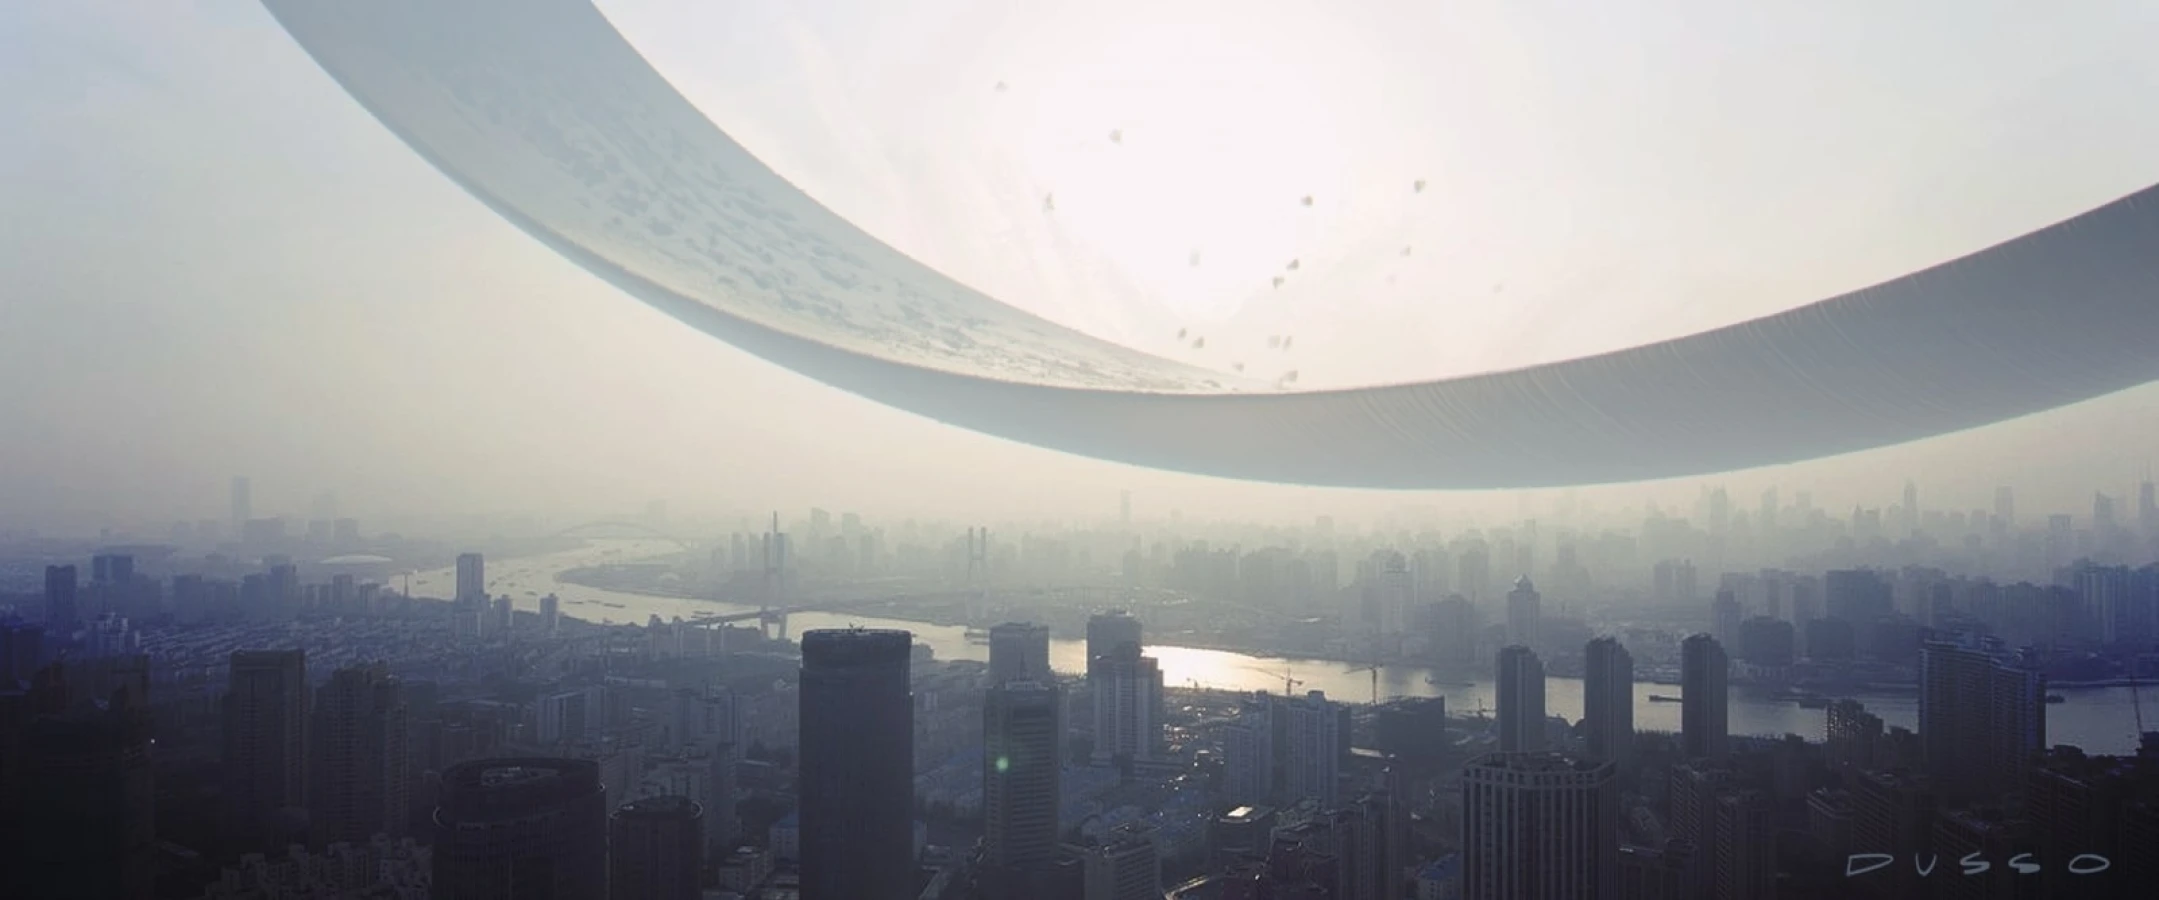  Arc ring spaceship above city from Raynault vfx 